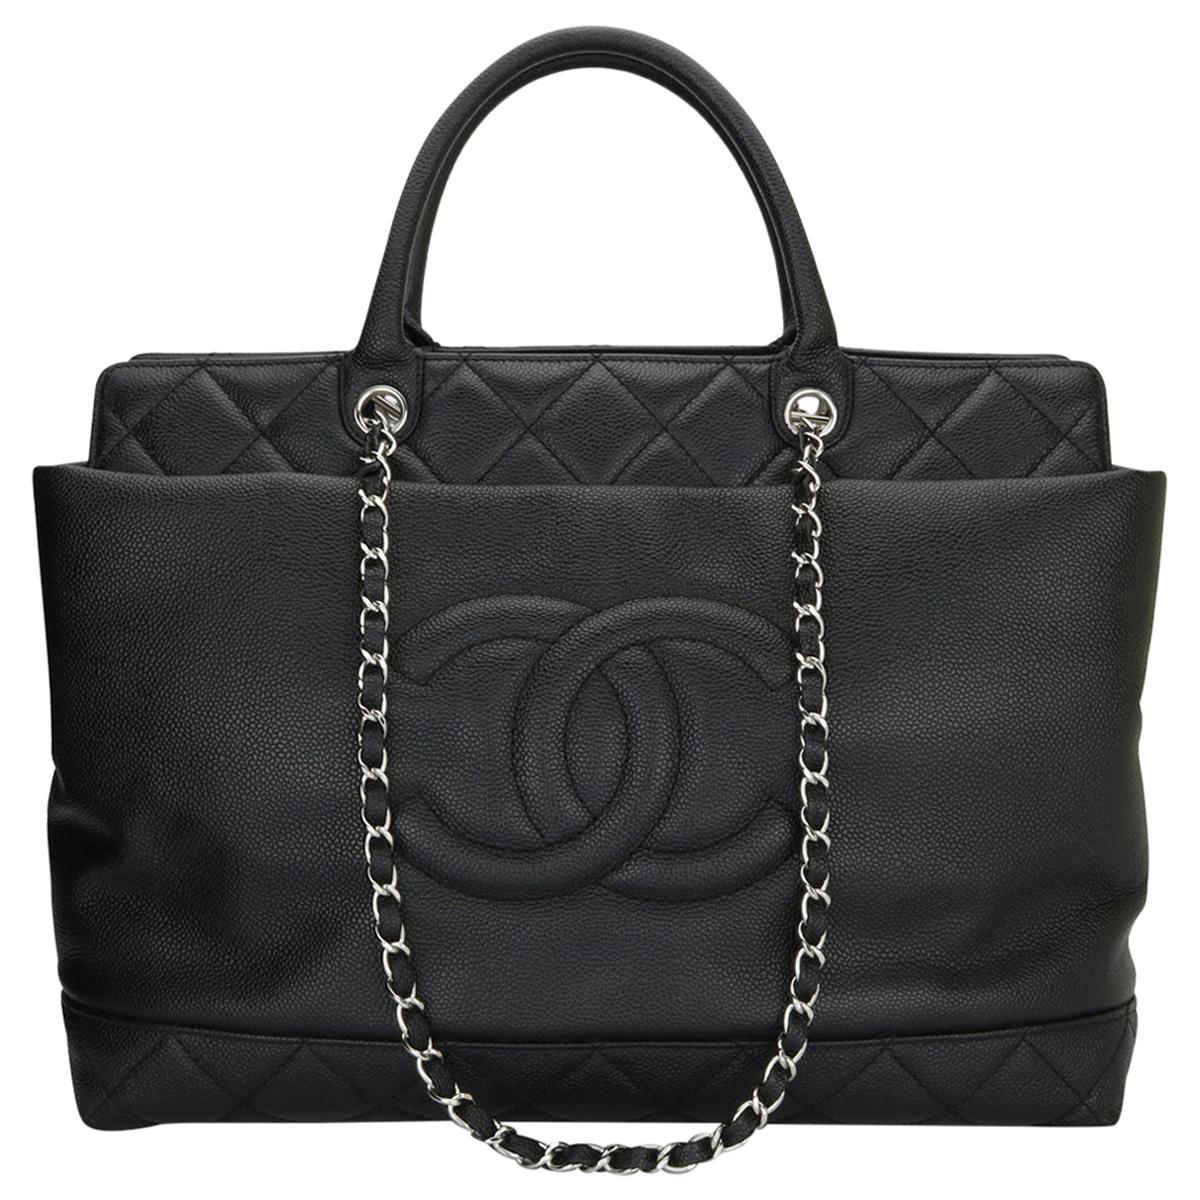 CHANEL Large Shopping Tote Bag Black Caviar with Silver Hardware 2011